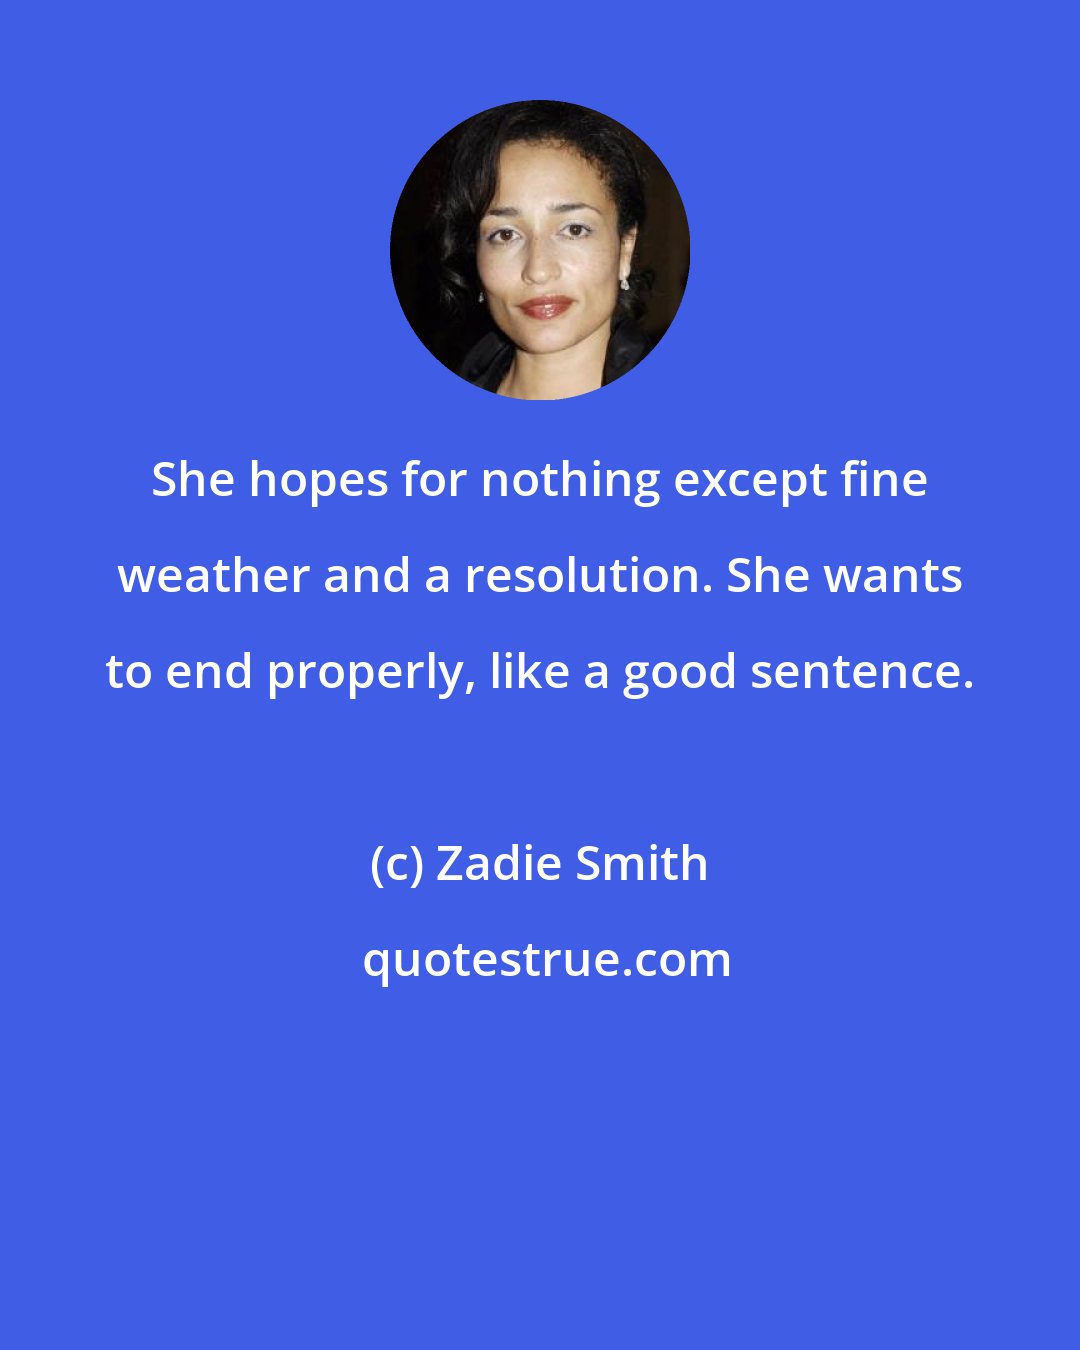 Zadie Smith: She hopes for nothing except fine weather and a resolution. She wants to end properly, like a good sentence.